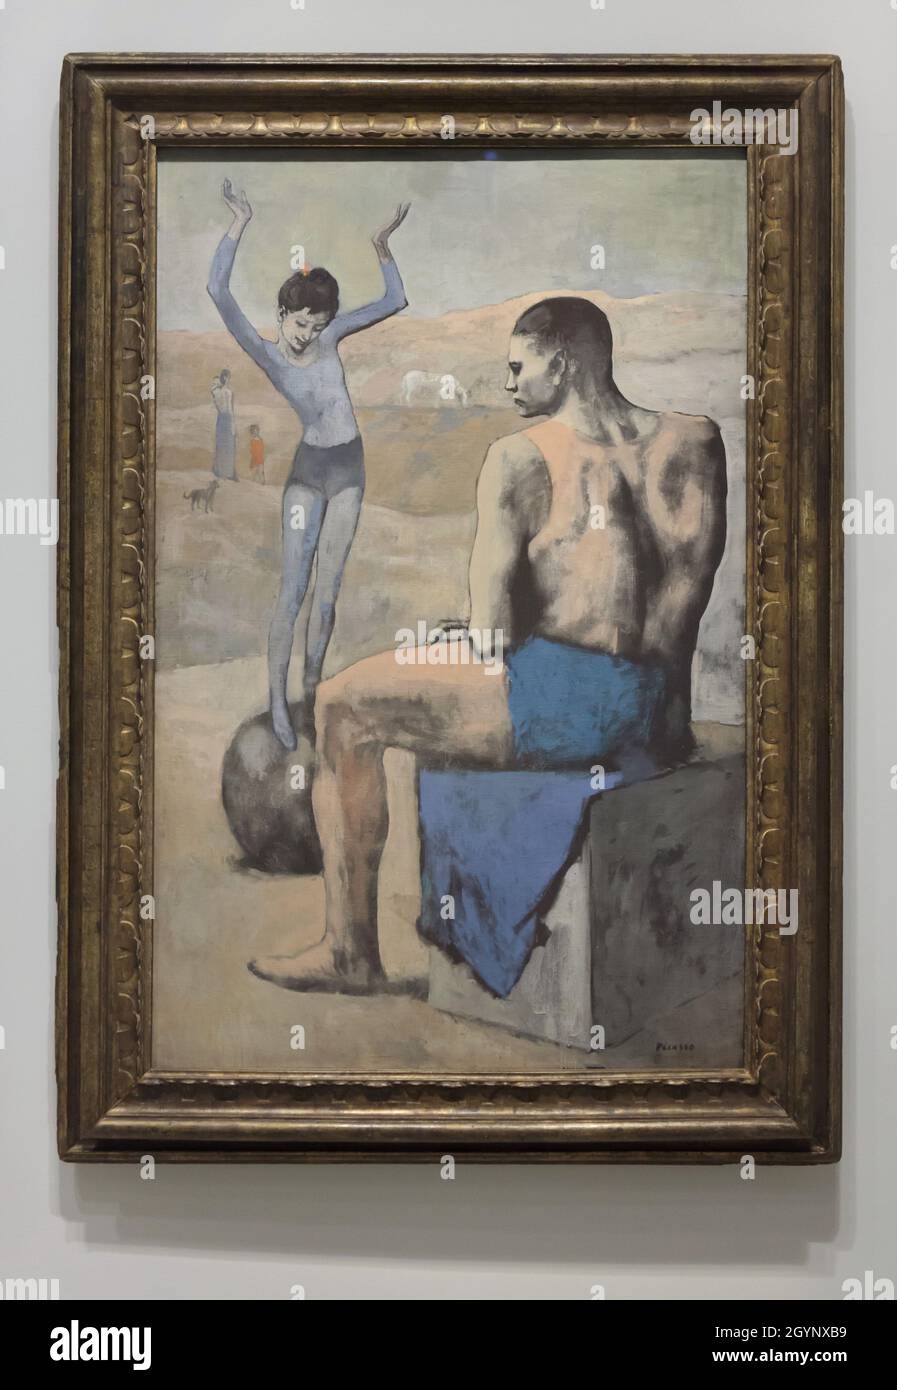 Painting 'Young Acrobat on a Ball' by Pablo Picasso (1905) on display at the exhibition 'Icons of Modern Art from the Morozov Collection' in the Fondation Louis Vuitton in Paris, France. The exhibition runs till 22 February 2022. Stock Photo